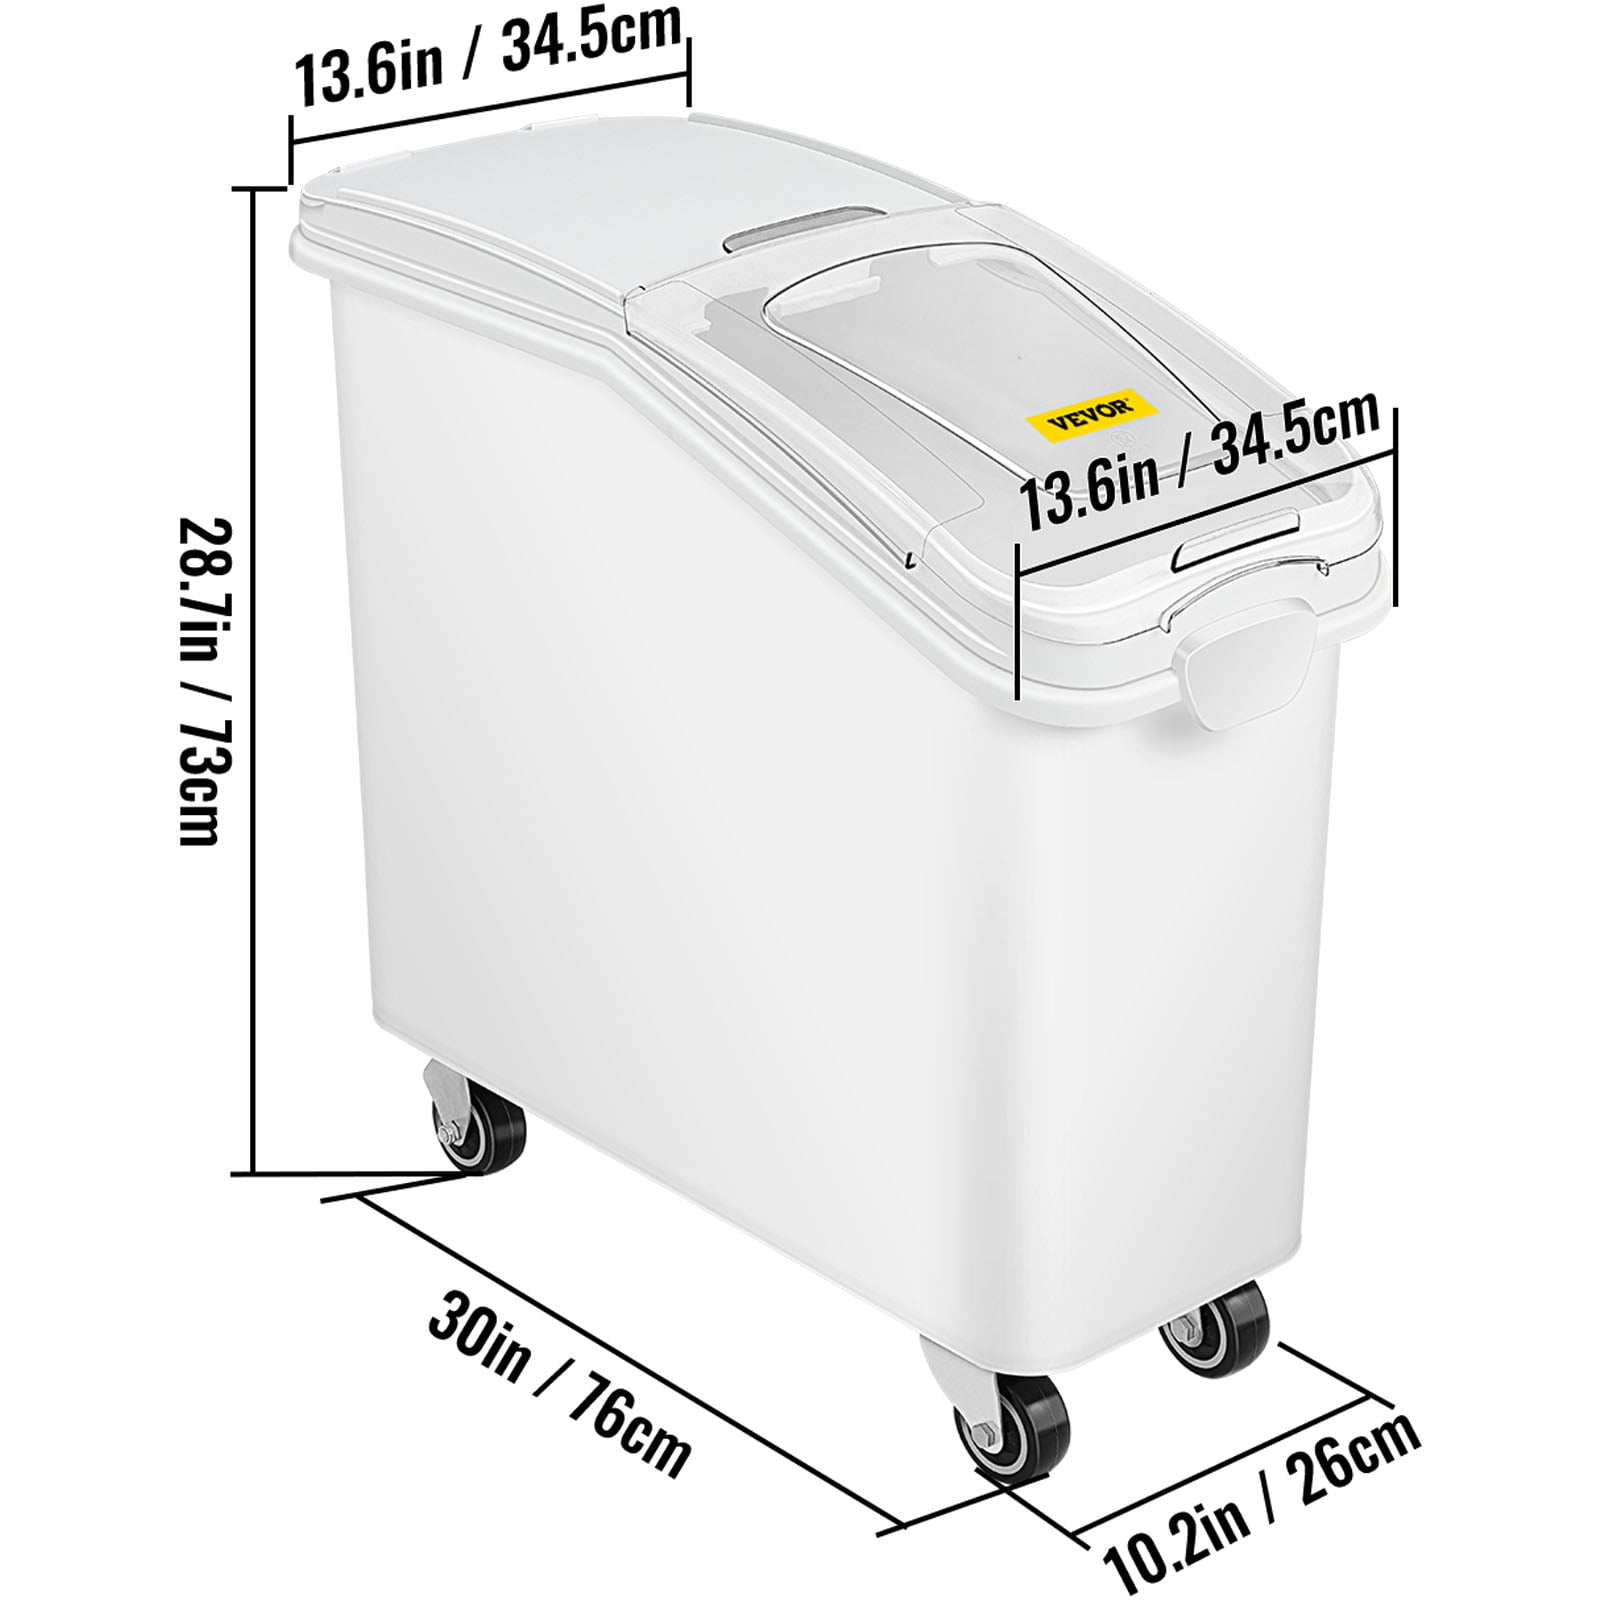 Dropship VEVOR Ingredient Bin, 10.5 Gallon And 6.6 Gallon Capacity  Ingredient Storage Bin, PP Material Flour Bins On Wheels, White Shelf  Ingredient Bin With Scoop, Commercial to Sell Online at a Lower